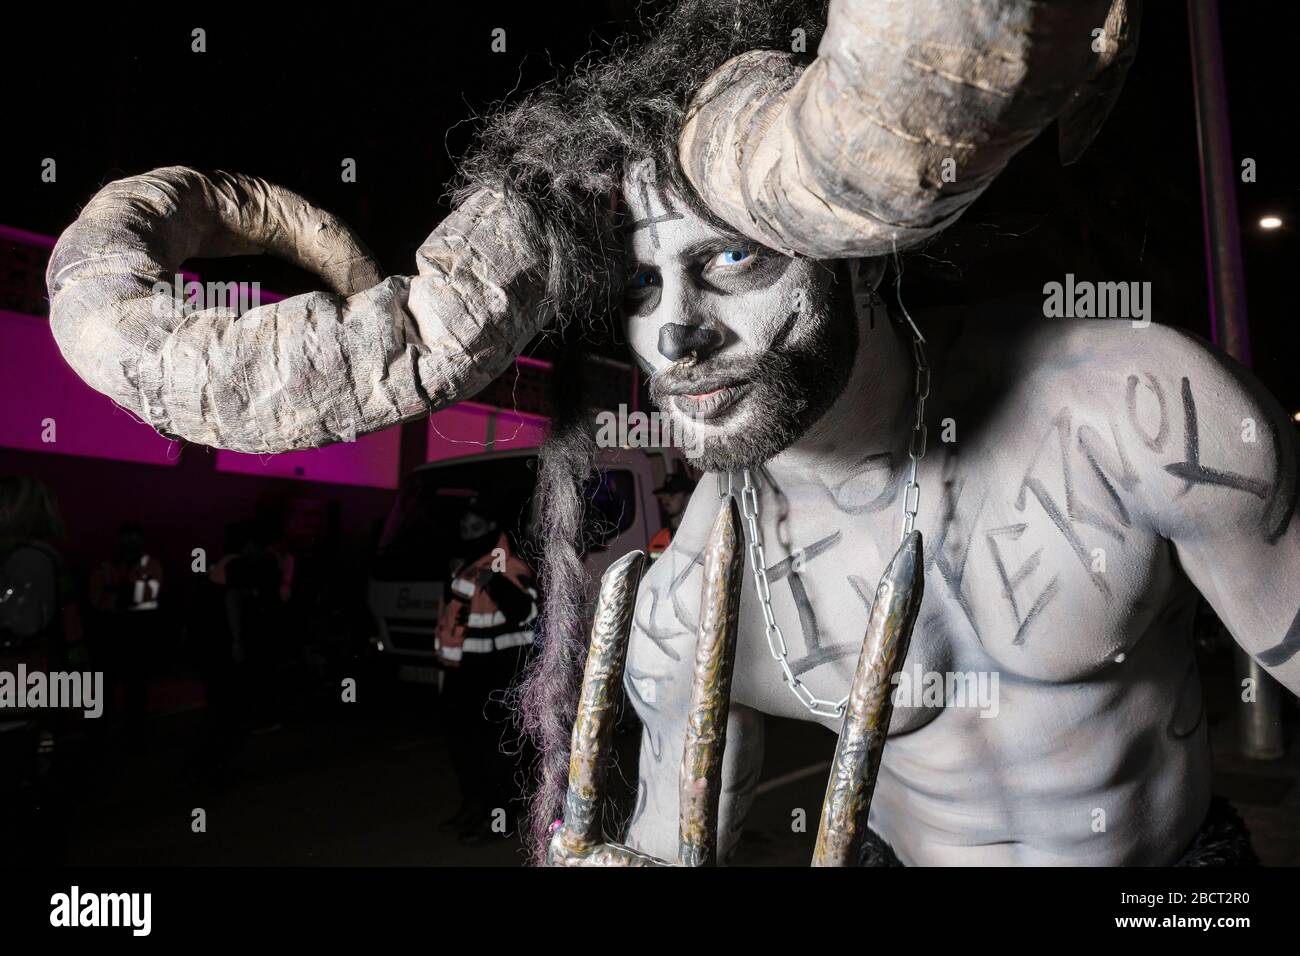 A man, dressed up as a wild animal, partying in the streets during the funeral procession Burial of the Sardine Stock Photo